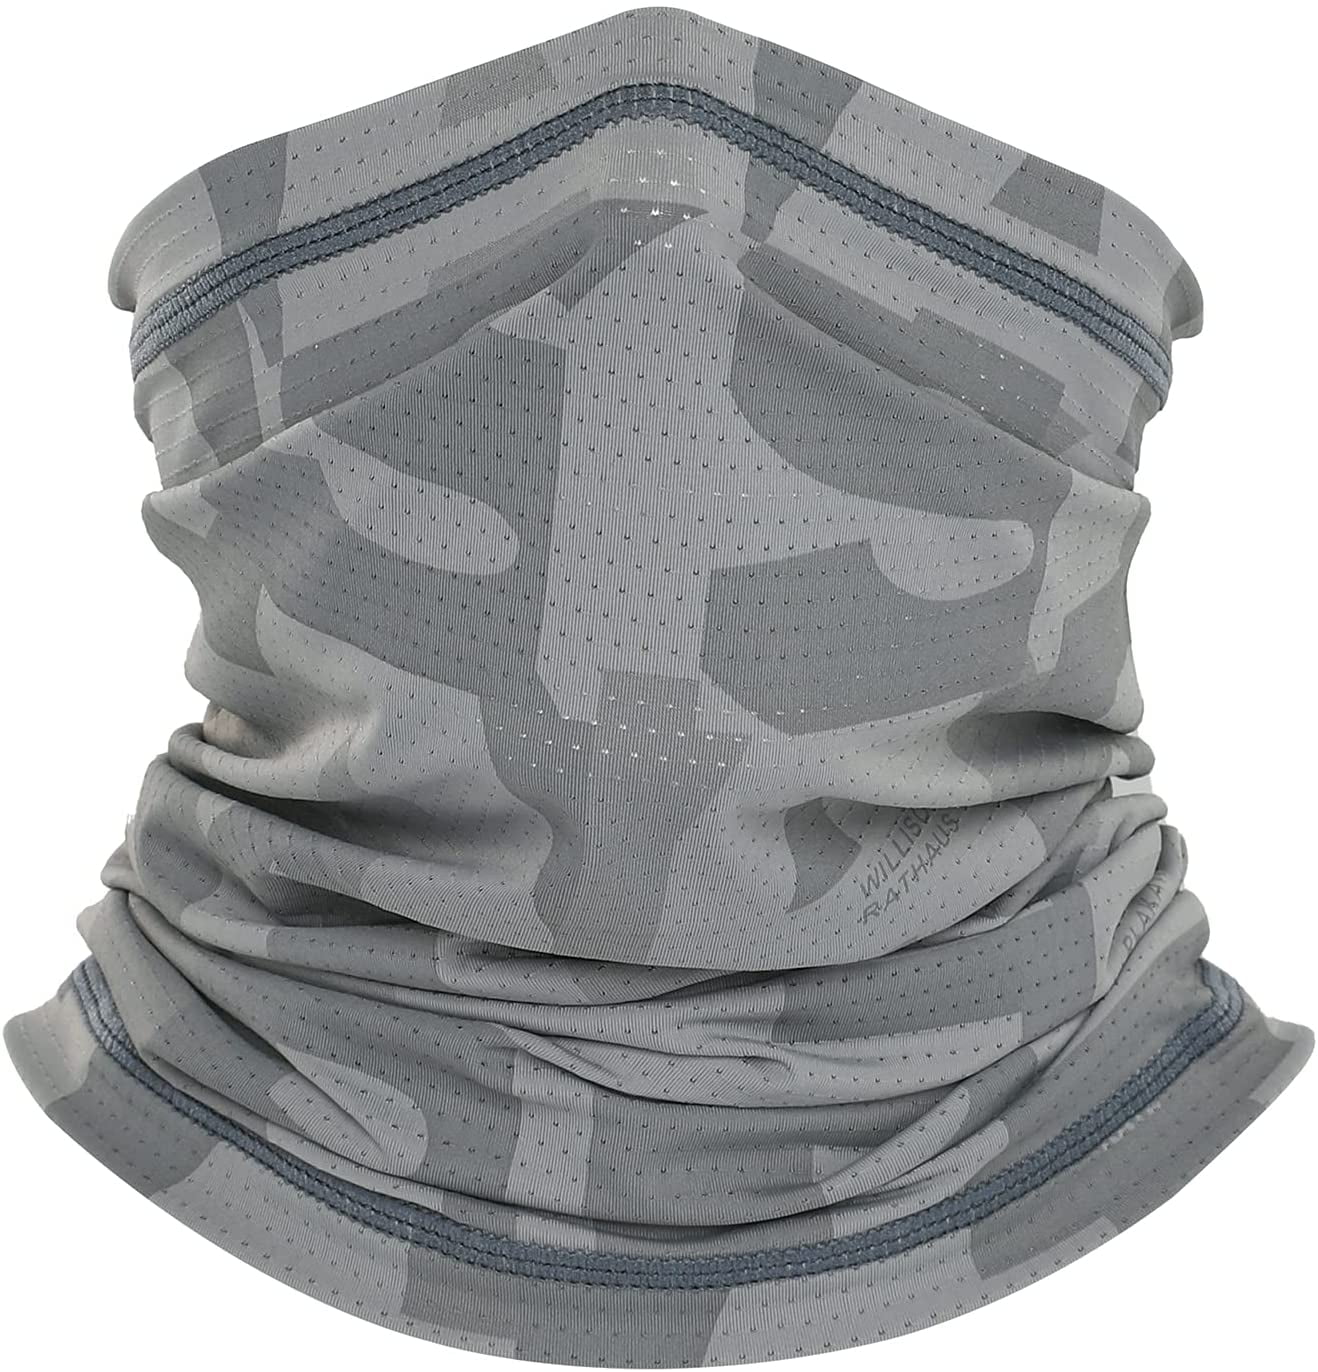 Cooling Neck Gaiter Face Cover Scarf Balaclava UV Protection Breathable Bandanas 